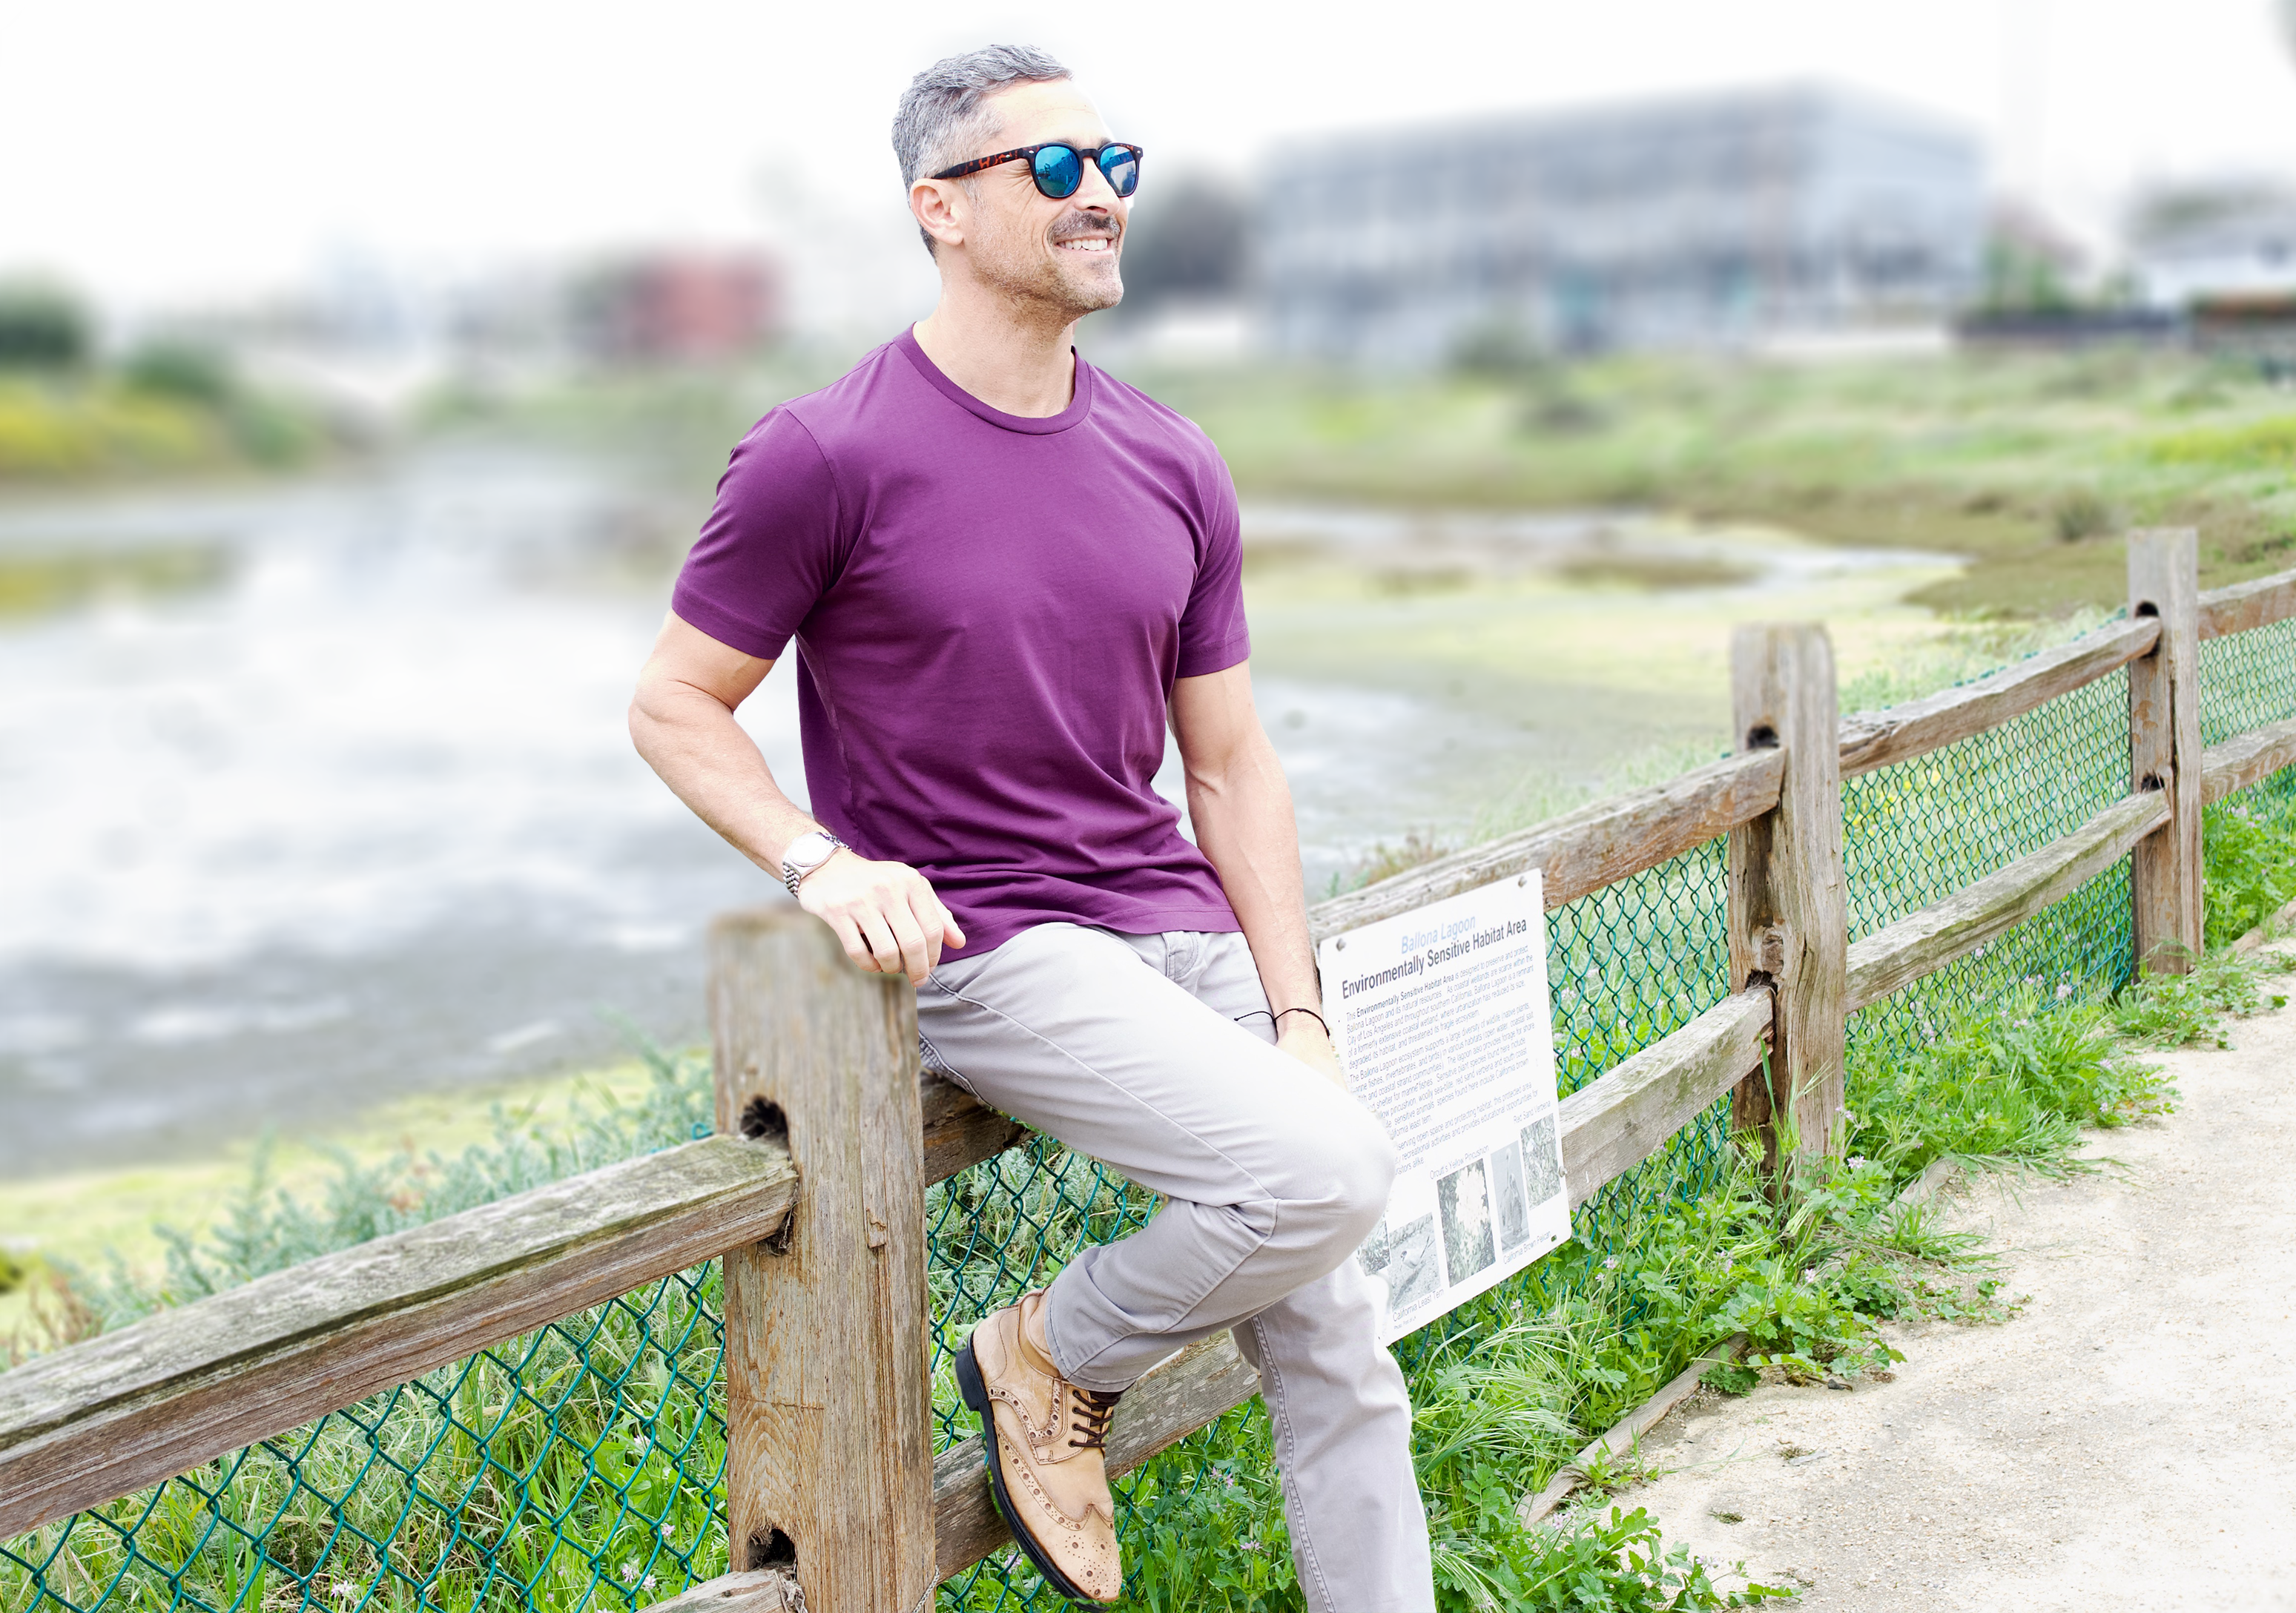 Model leans against a fence in Venice Canals in California. He wears sunglasses, a light aubergine crew neck tee shirt and grey pants. 